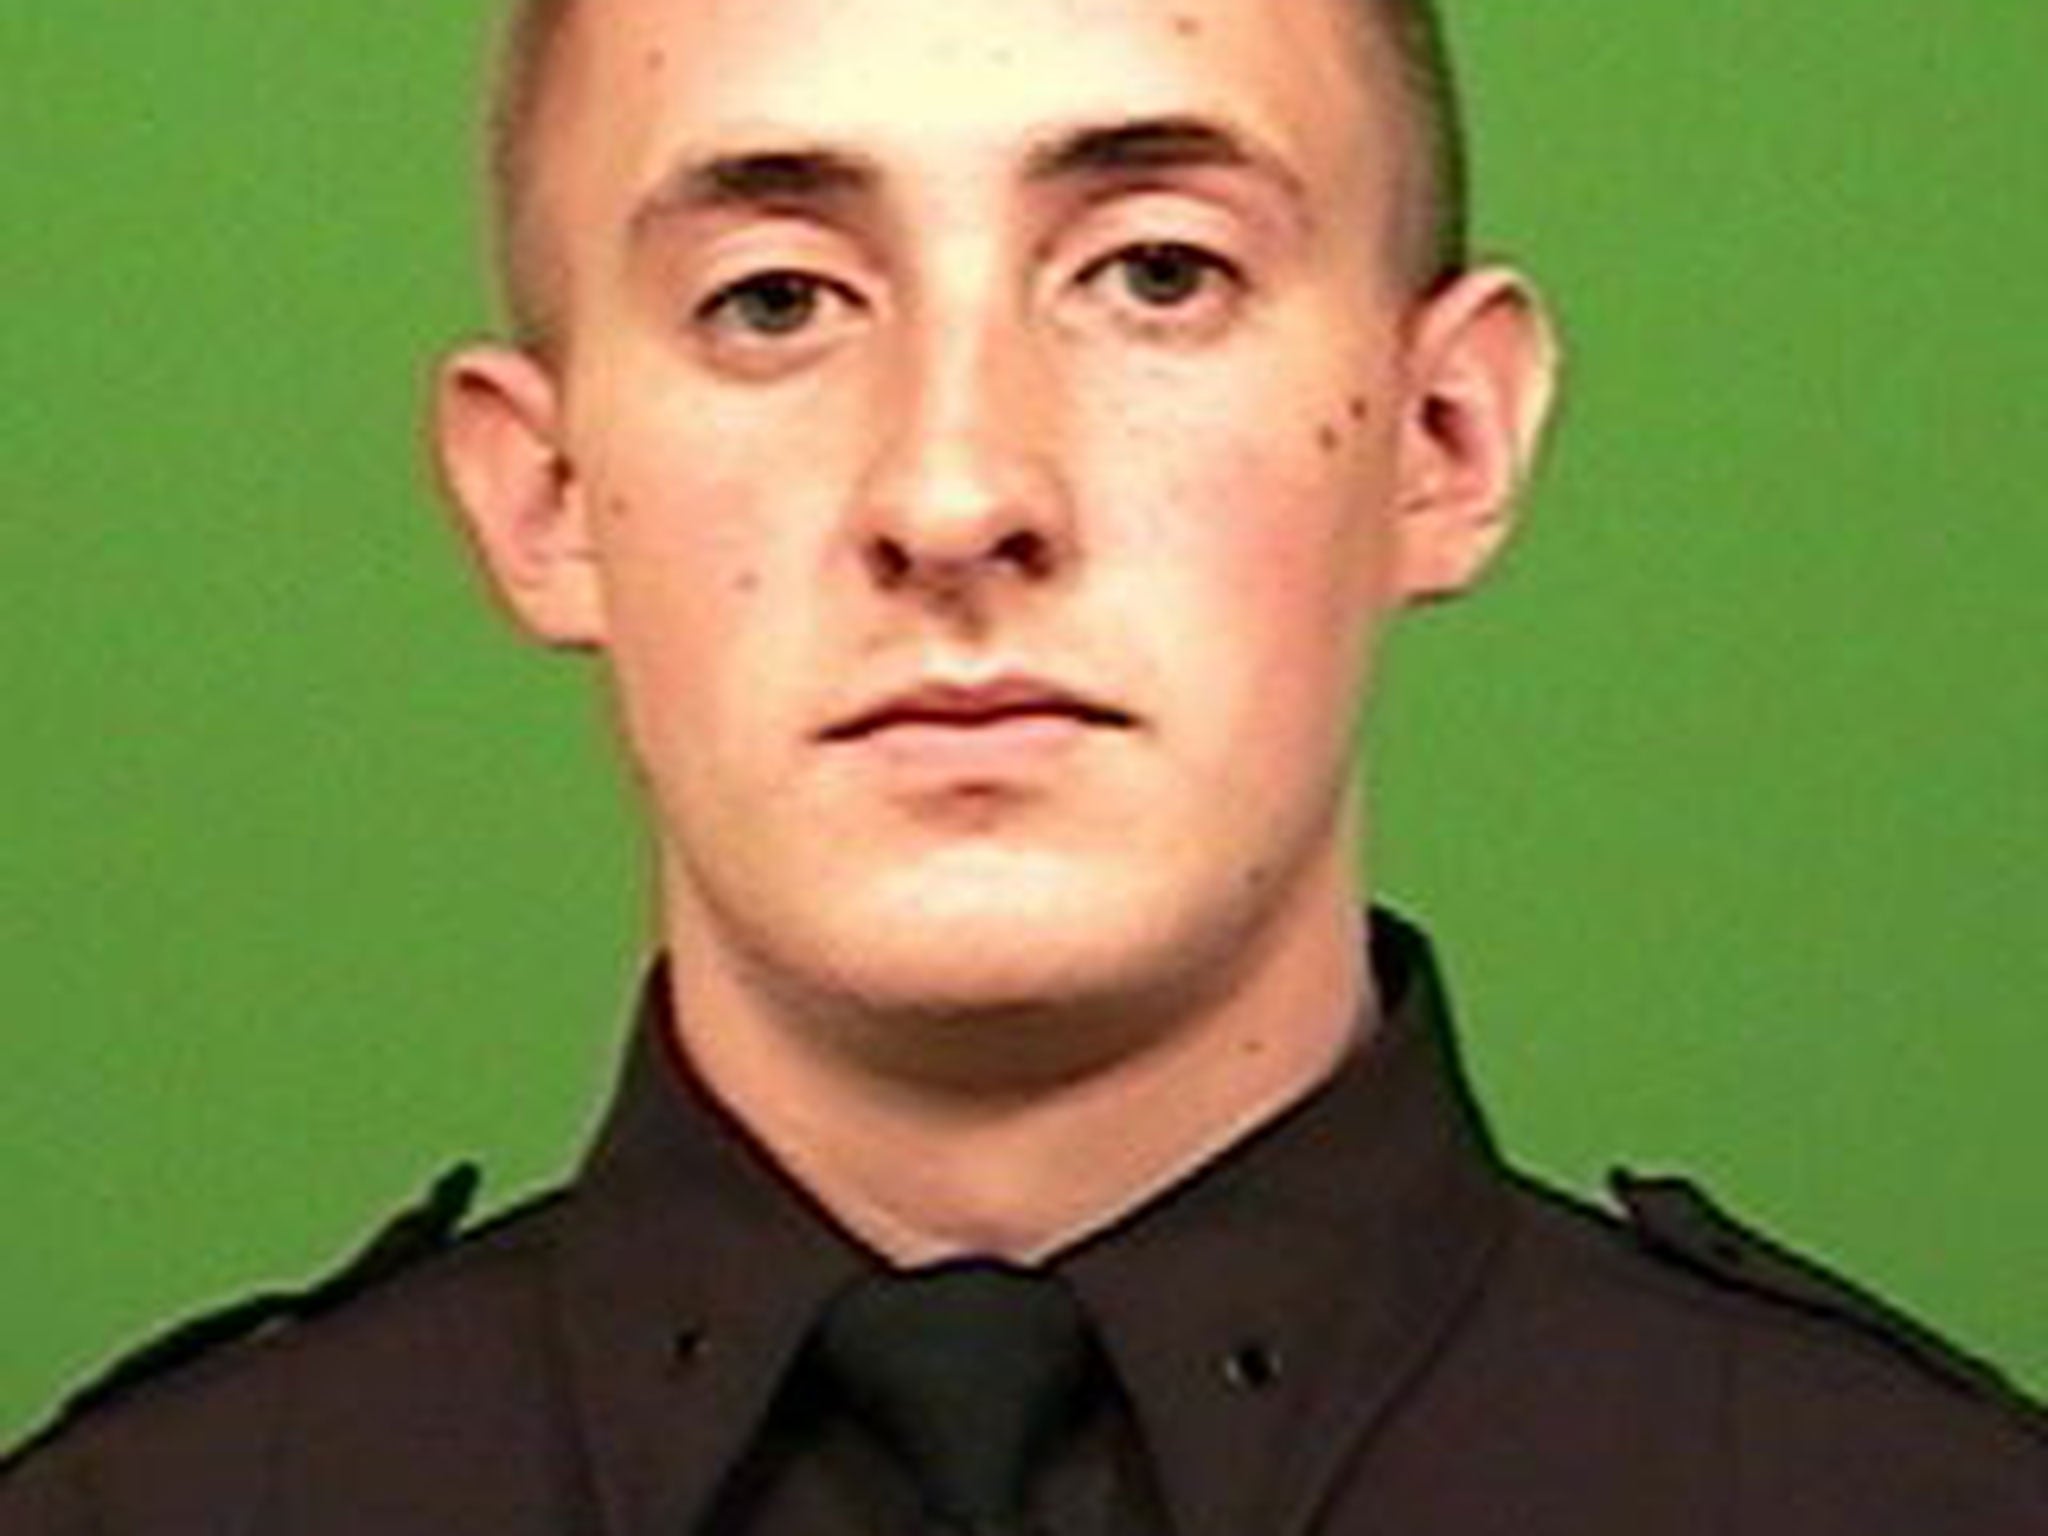 Photo released by the New York City Police Department shows officer Brian Moore, 25